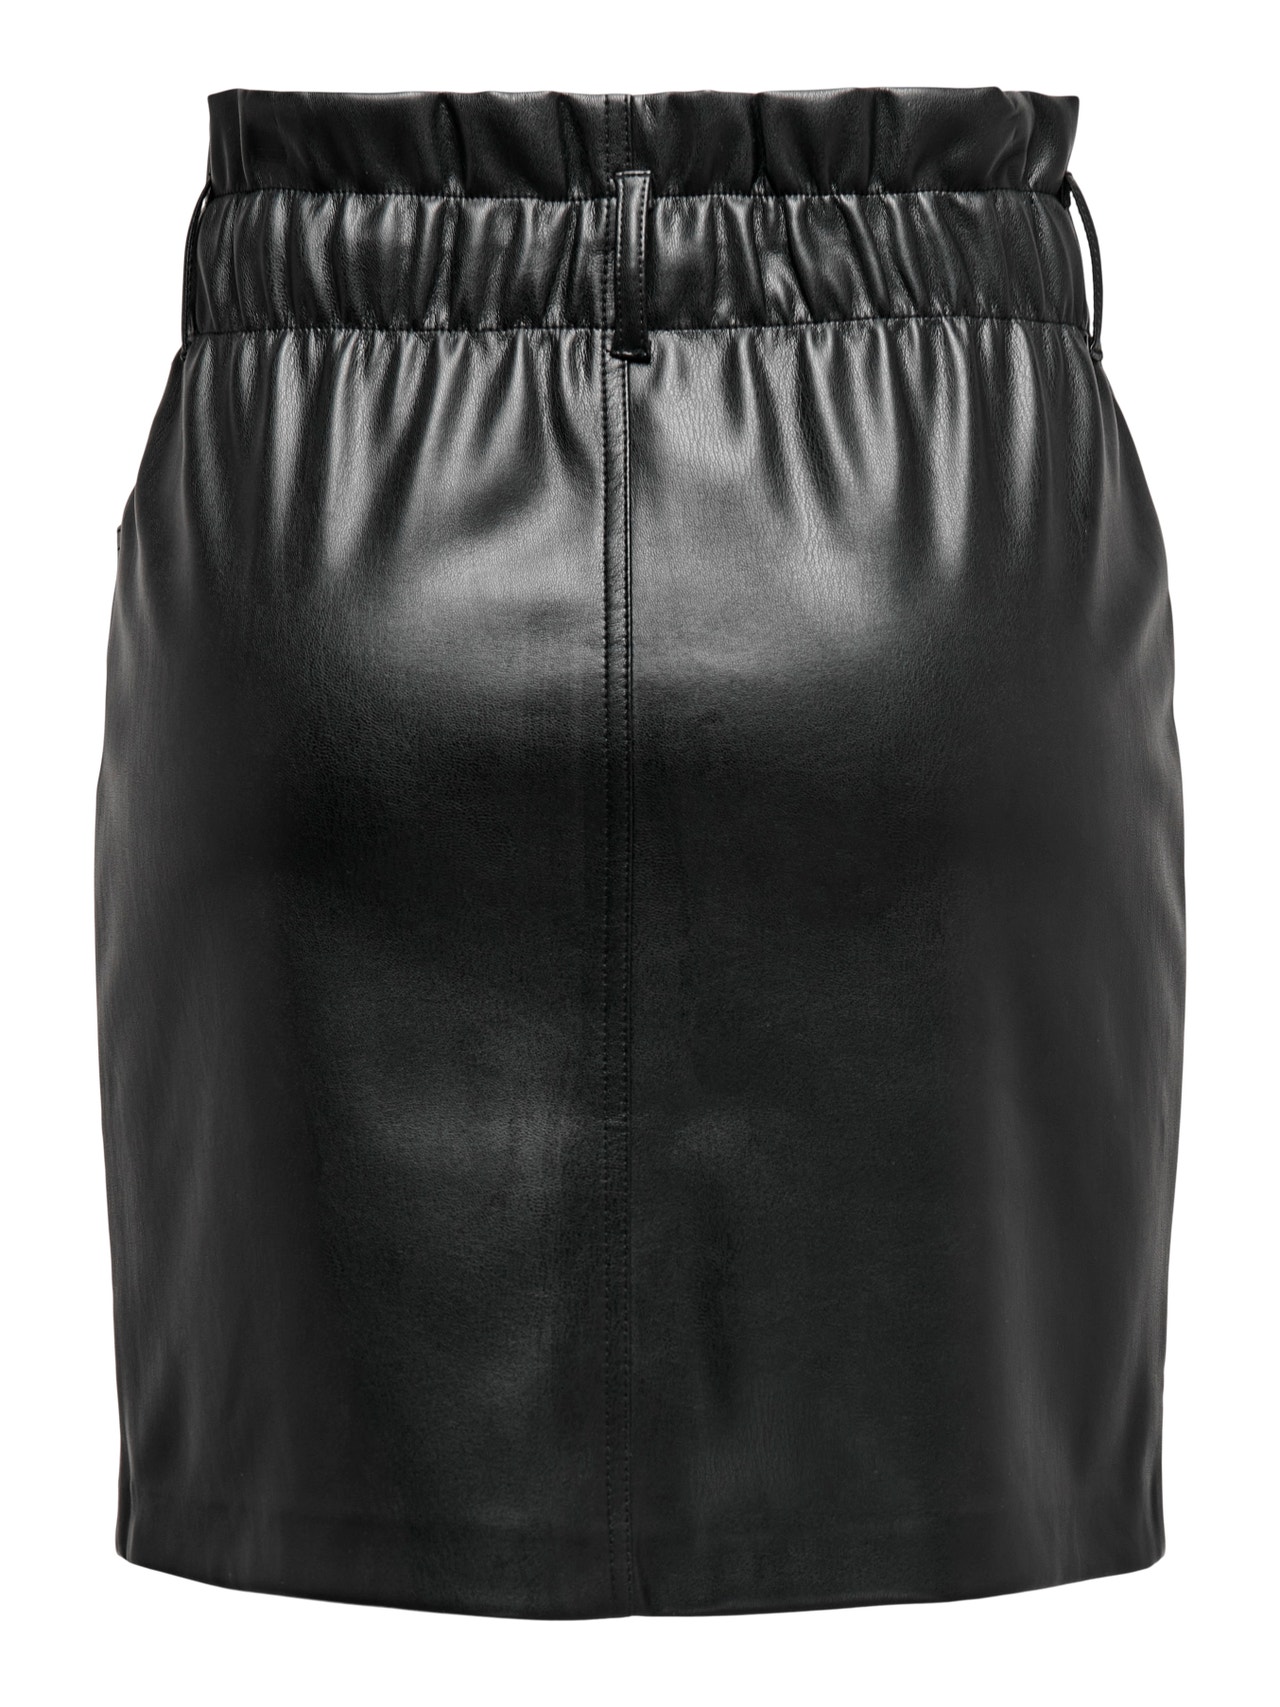 ONLY Leather look Skirt -Black - 15206801